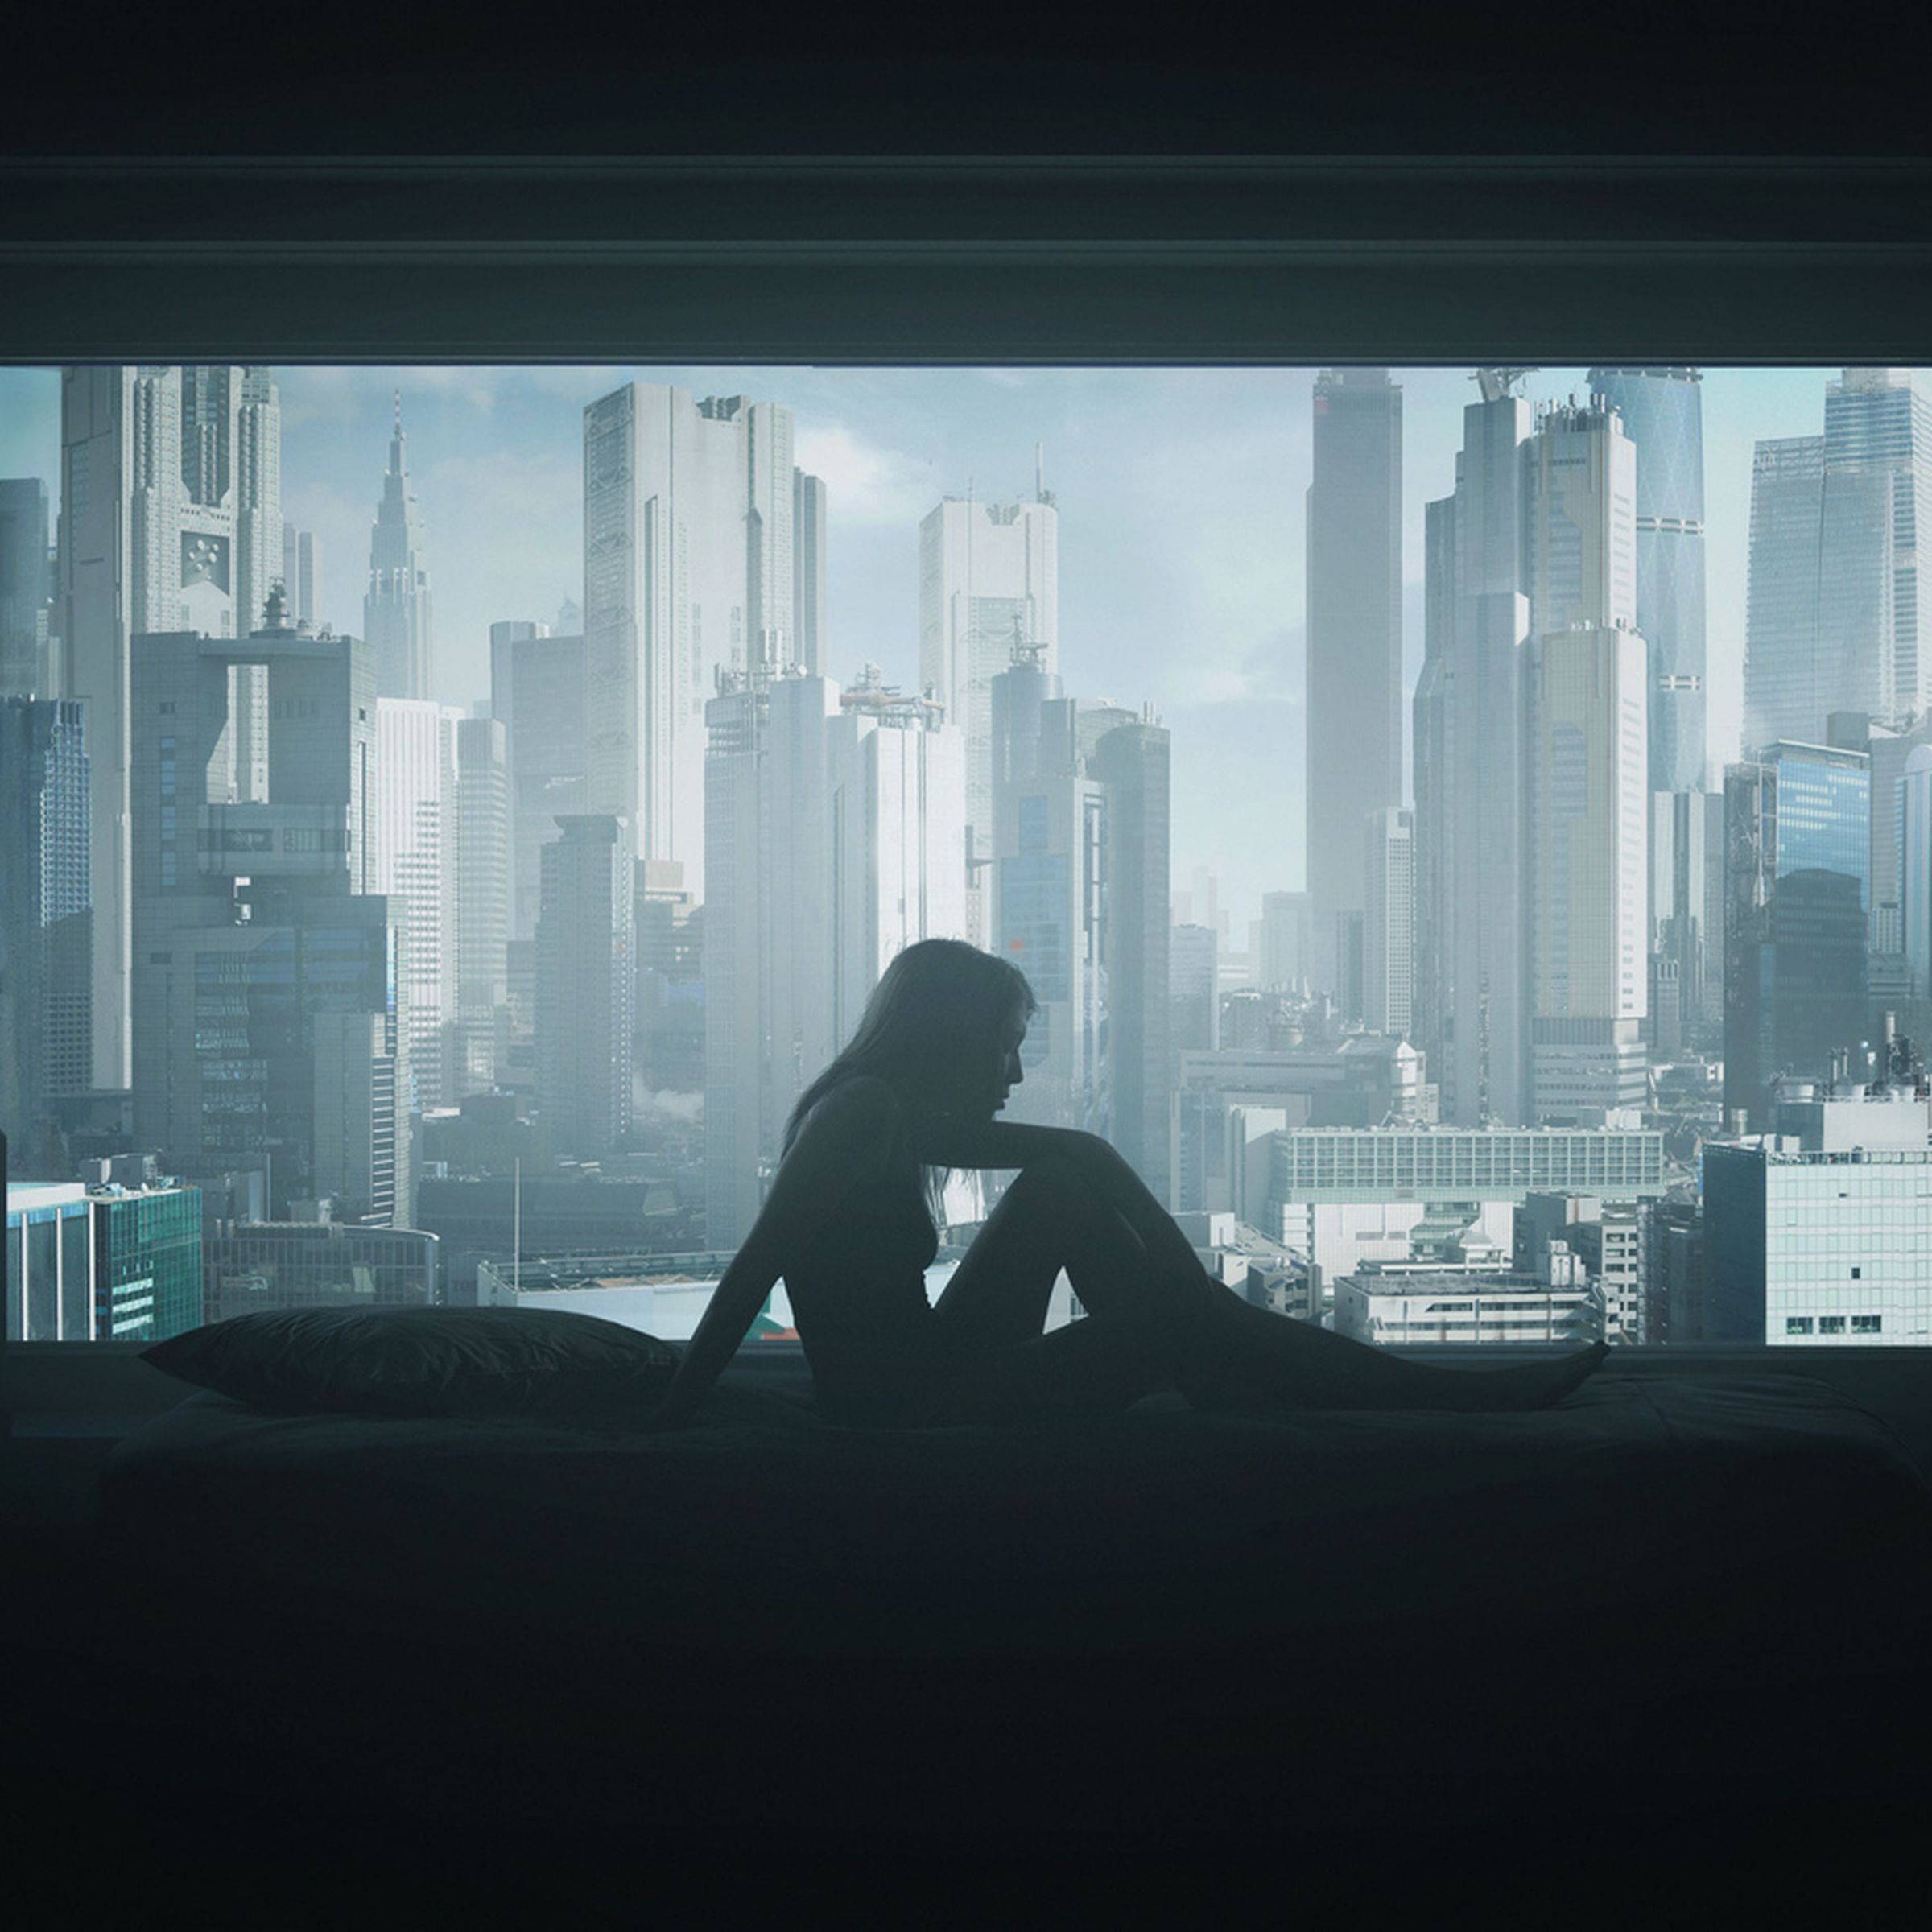 Still shot from 'Project 2501,' a remake of the 'Ghost in the Shell' title sequence